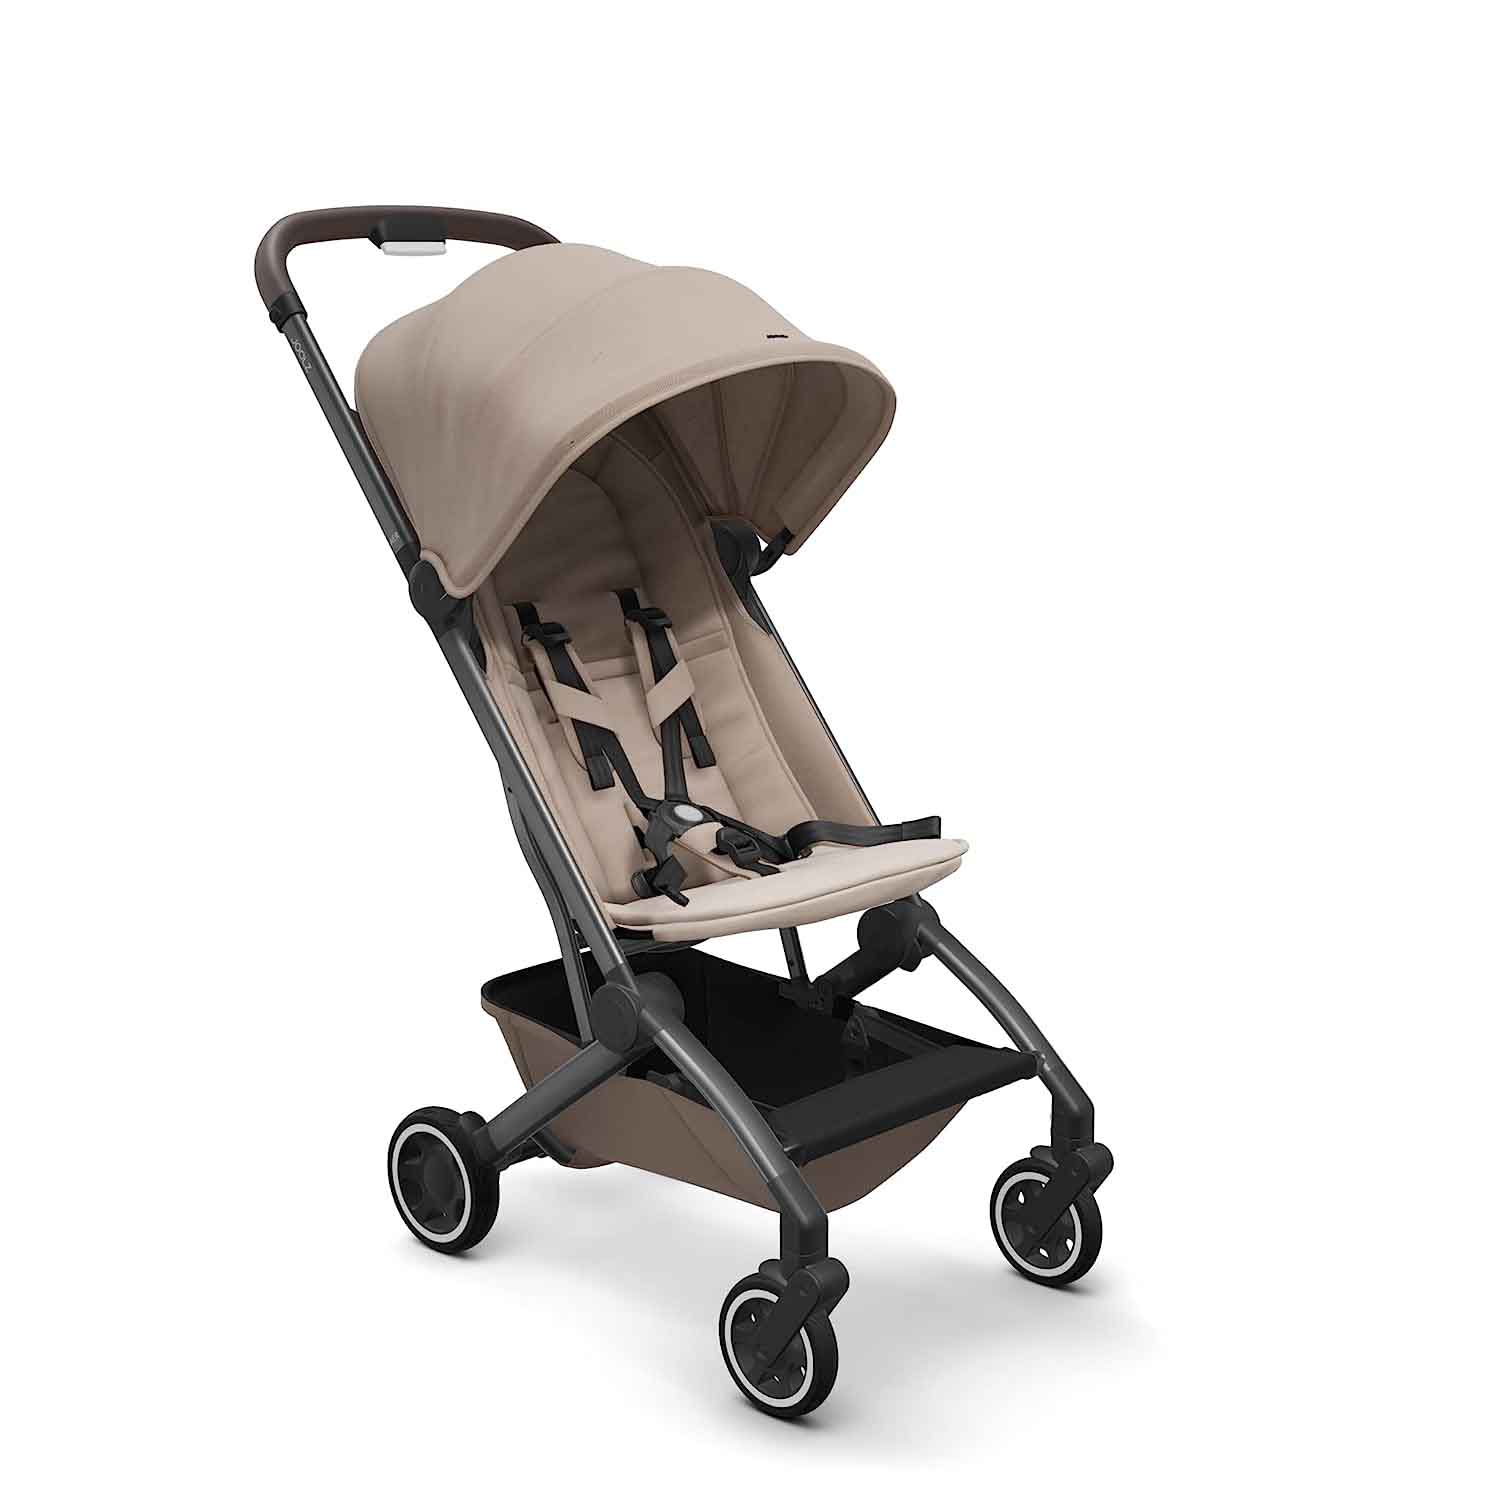 Joolz AER Premium Baby Stroller in taupe